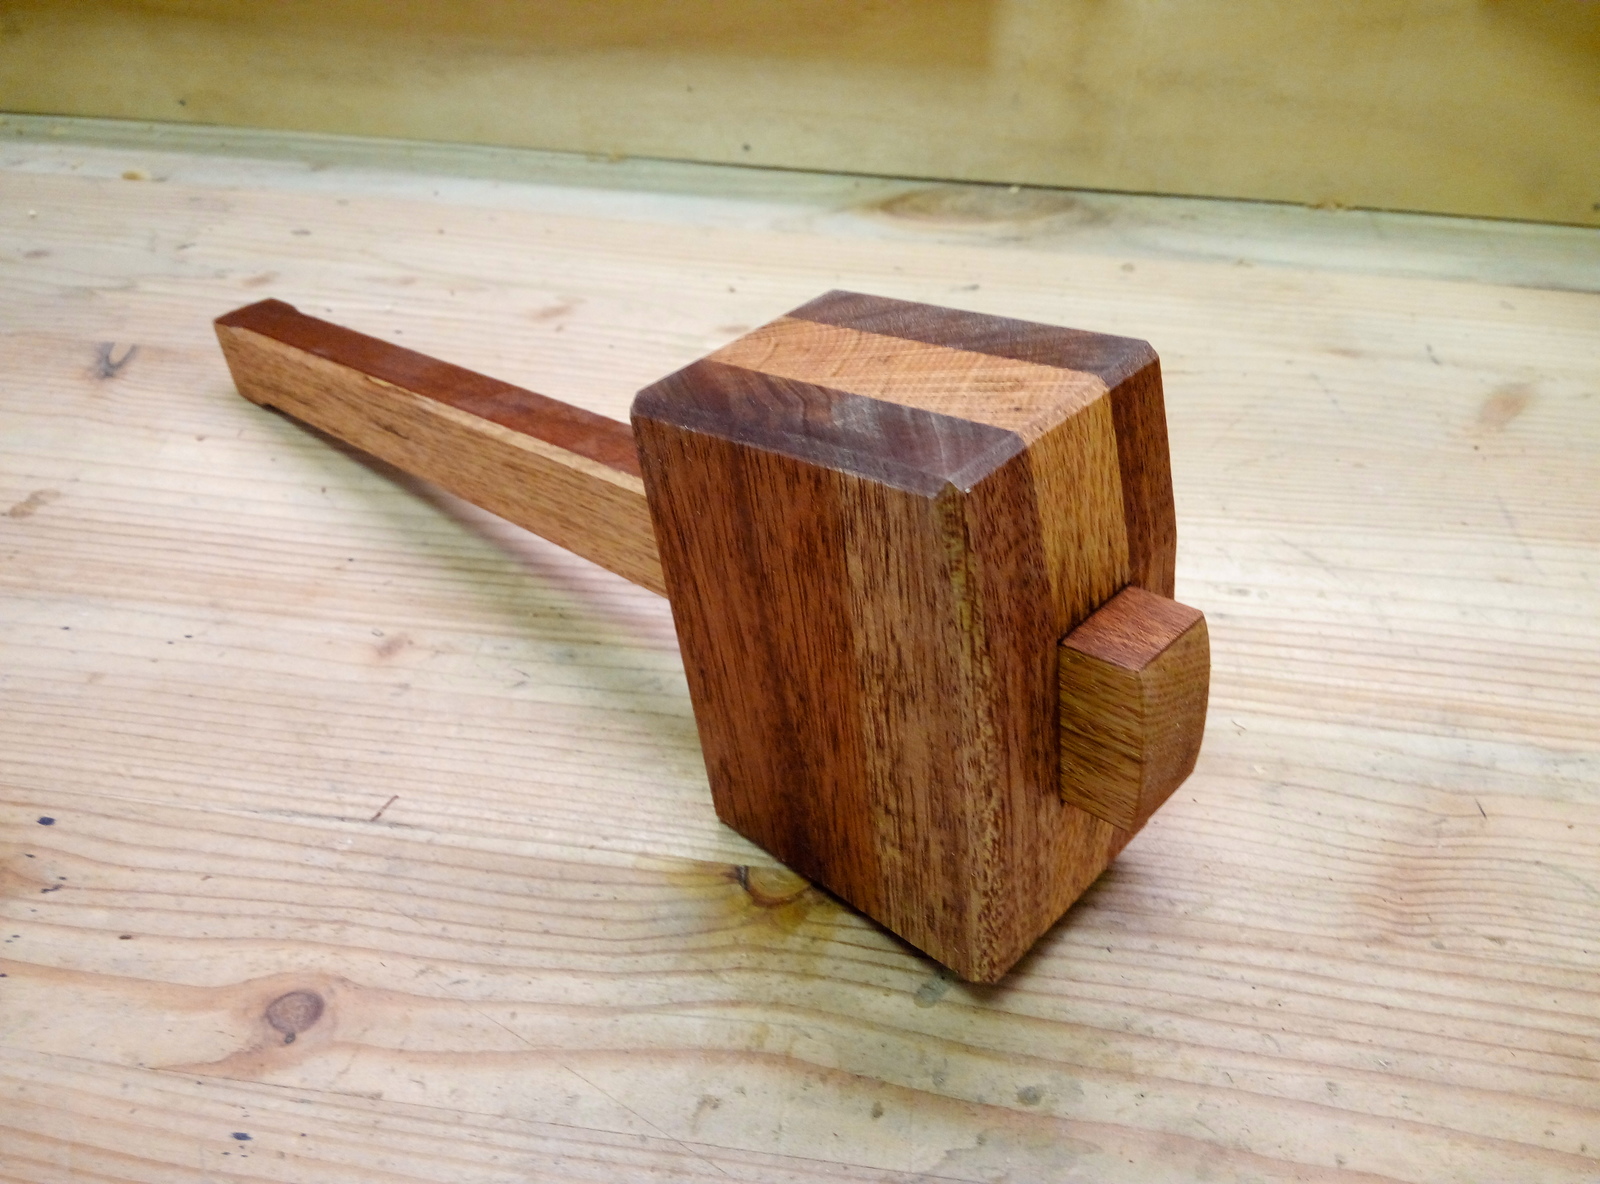 Do-it-yourself mallet - My, Carpenter, With your own hands, Workshop, Woodworking, Mallet, Tree, Woodworking, Sapele, Longpost